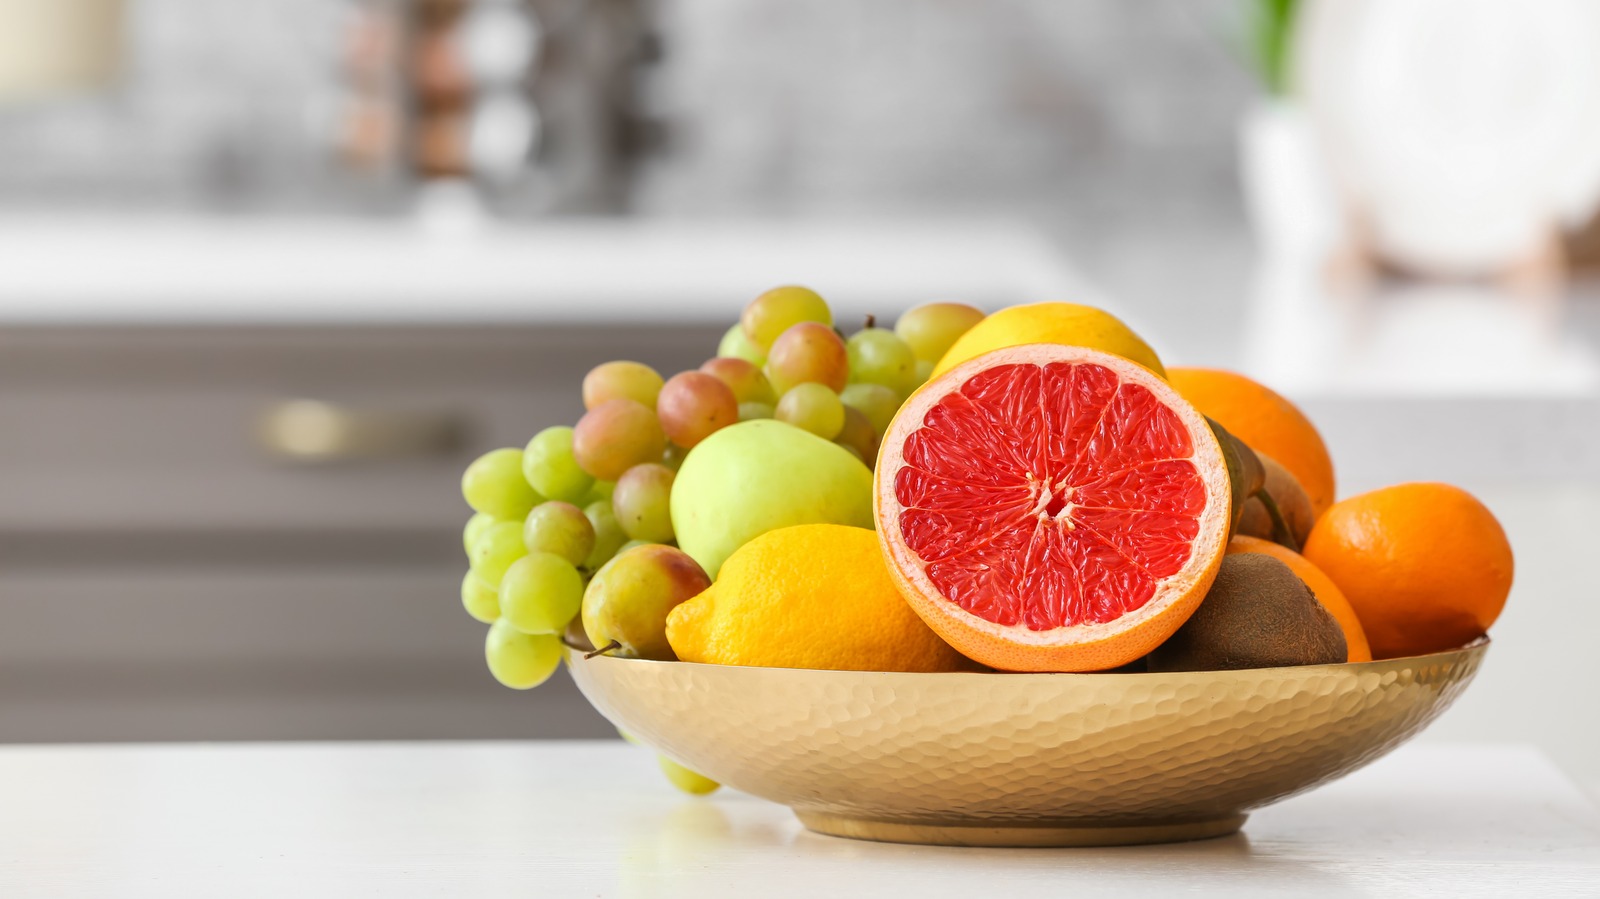 Displaying Fruit Can Improve Your Kitchen's Feng Shui - Here's Why